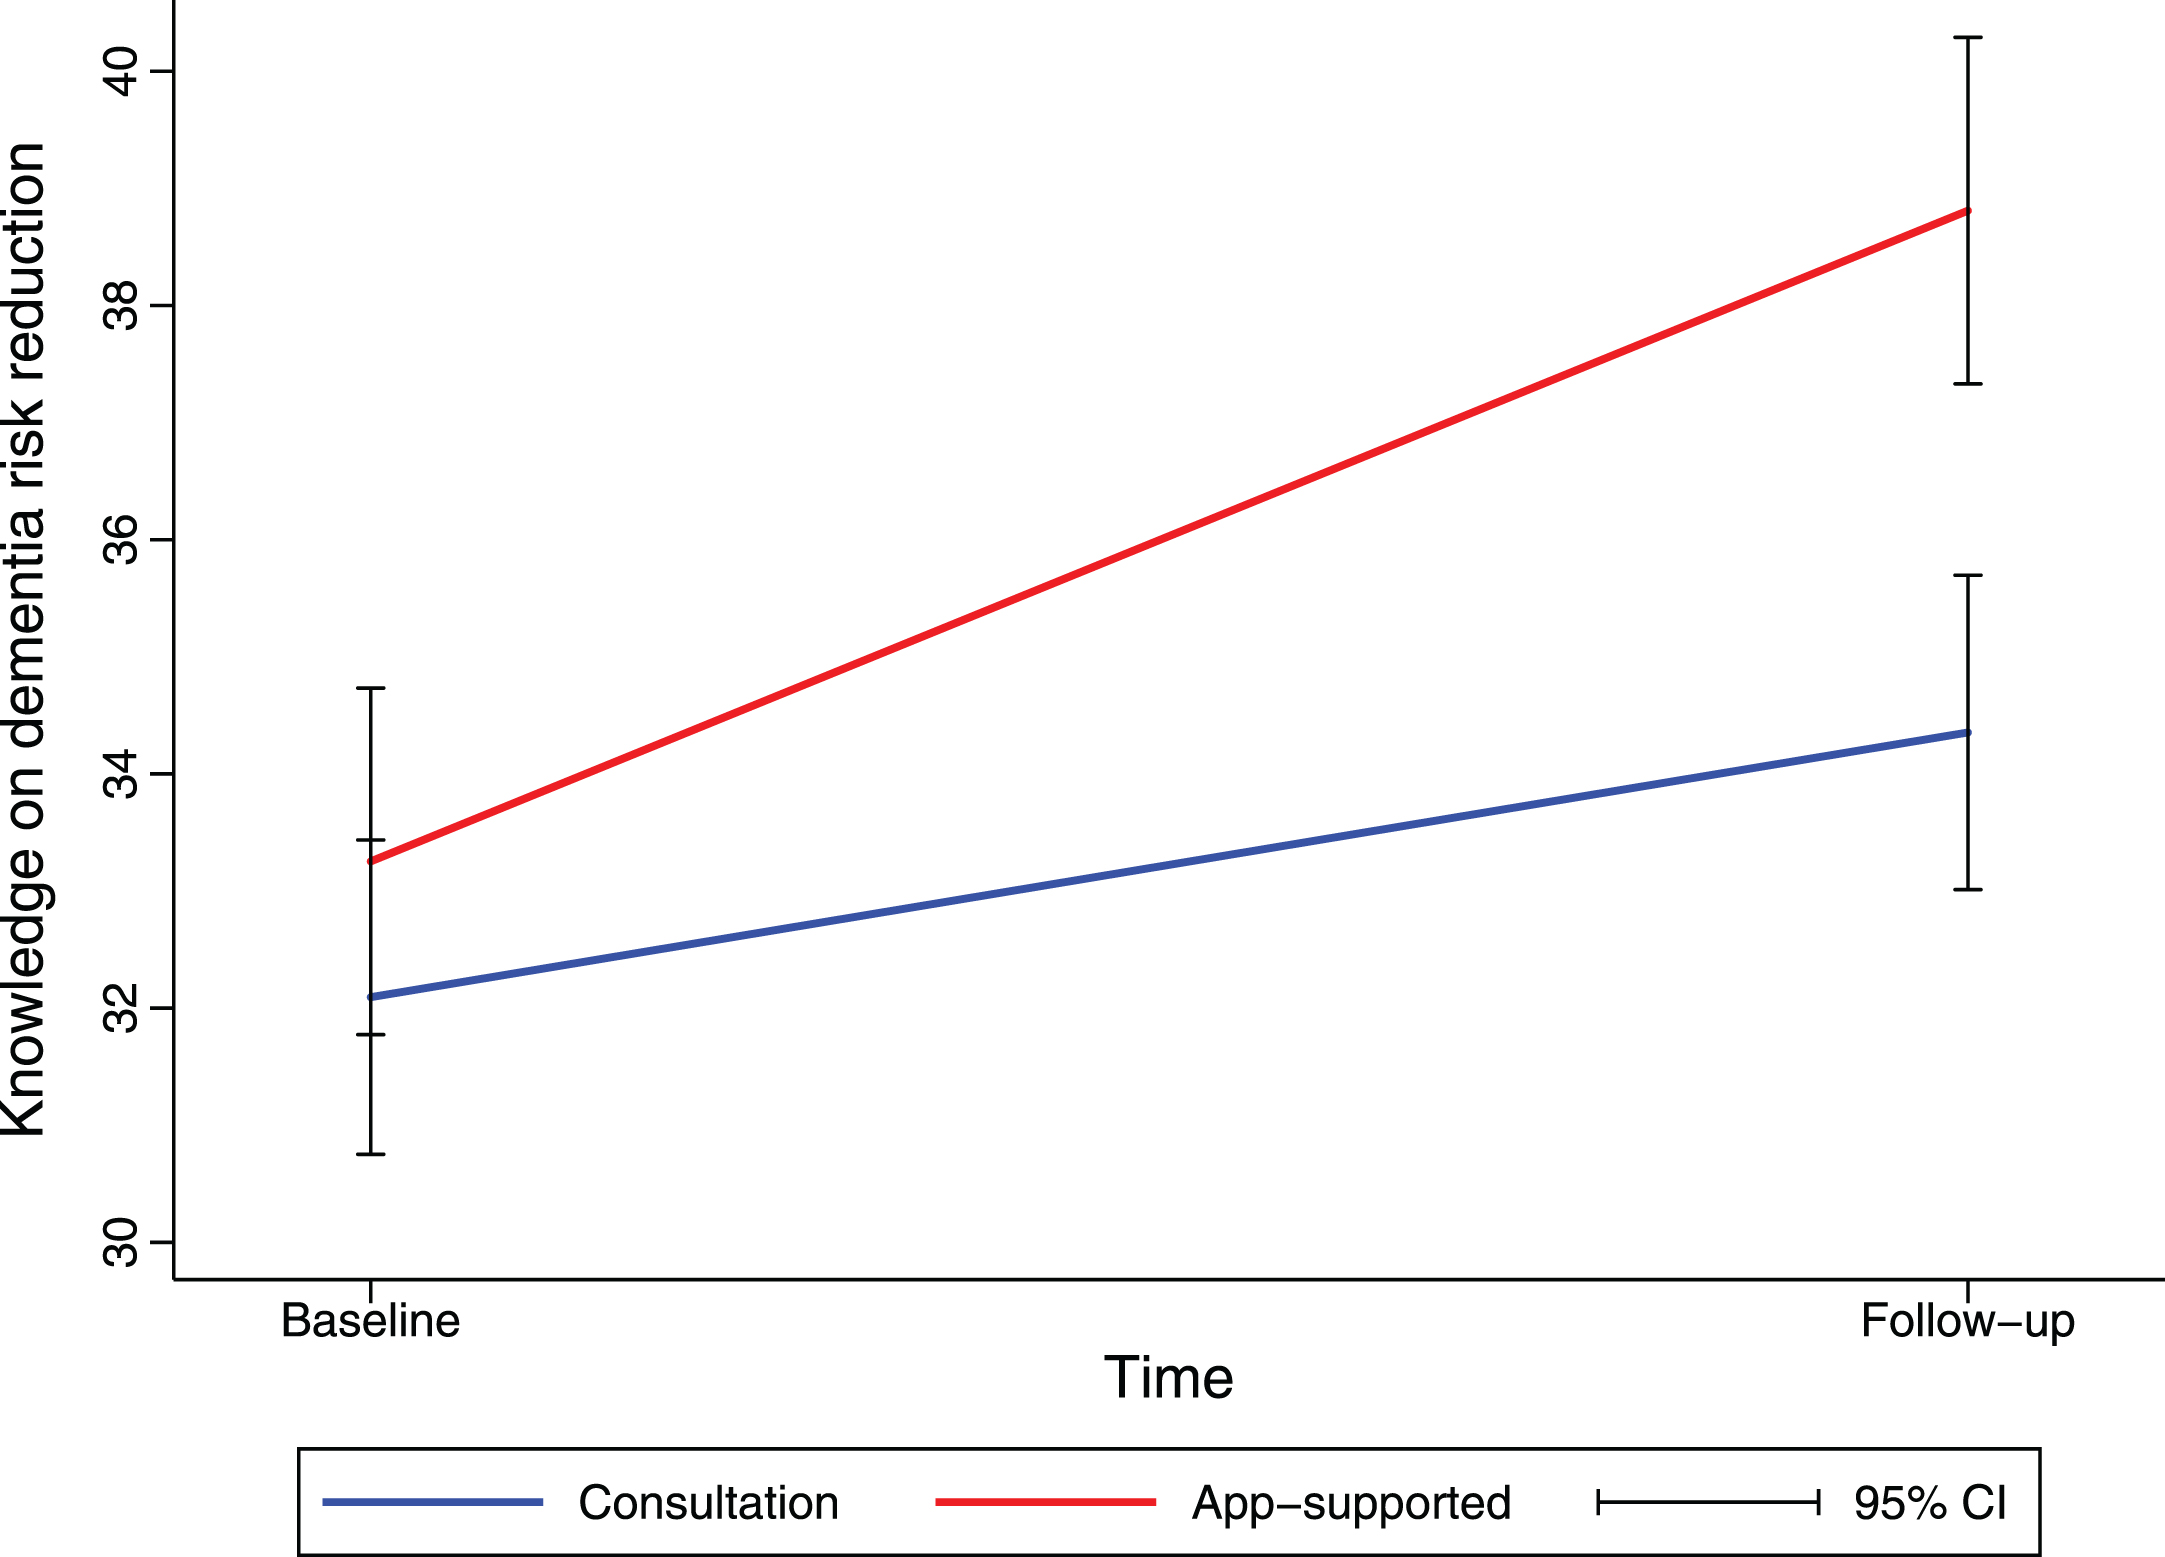 Knowledge on dementia risk reduction increased more in the app-supported group. Mean change in knowledge on dementia risk reduction from baseline until follow-up (at three months), as estimated by linear mixed model analysis, is shown. Values for knowledge are sum scores based on a 13-item questionnaire. CI, confidence interval.